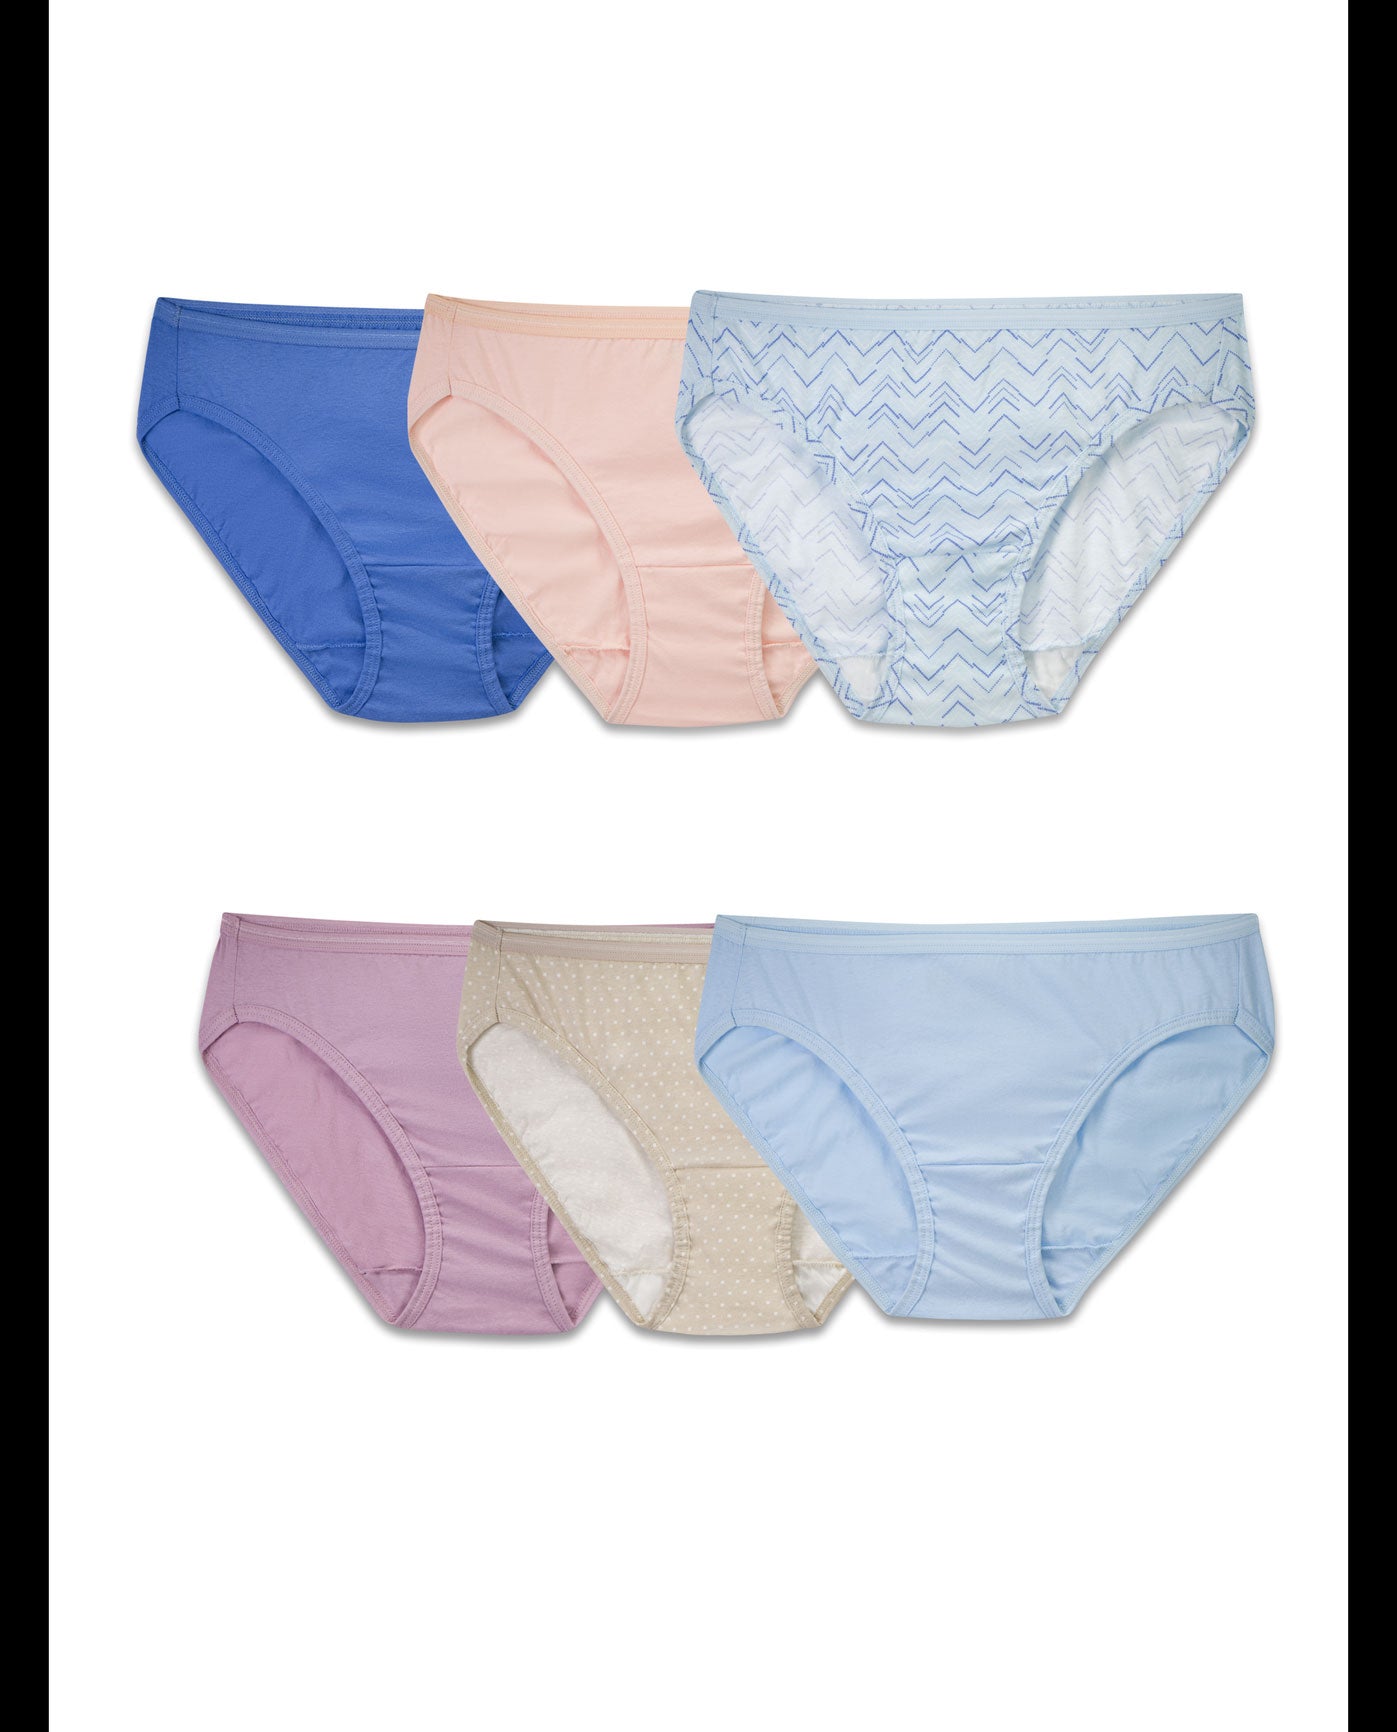 Fruit of the Loom Women's 6 Pack Cotton Brief Panties, Assorted 2